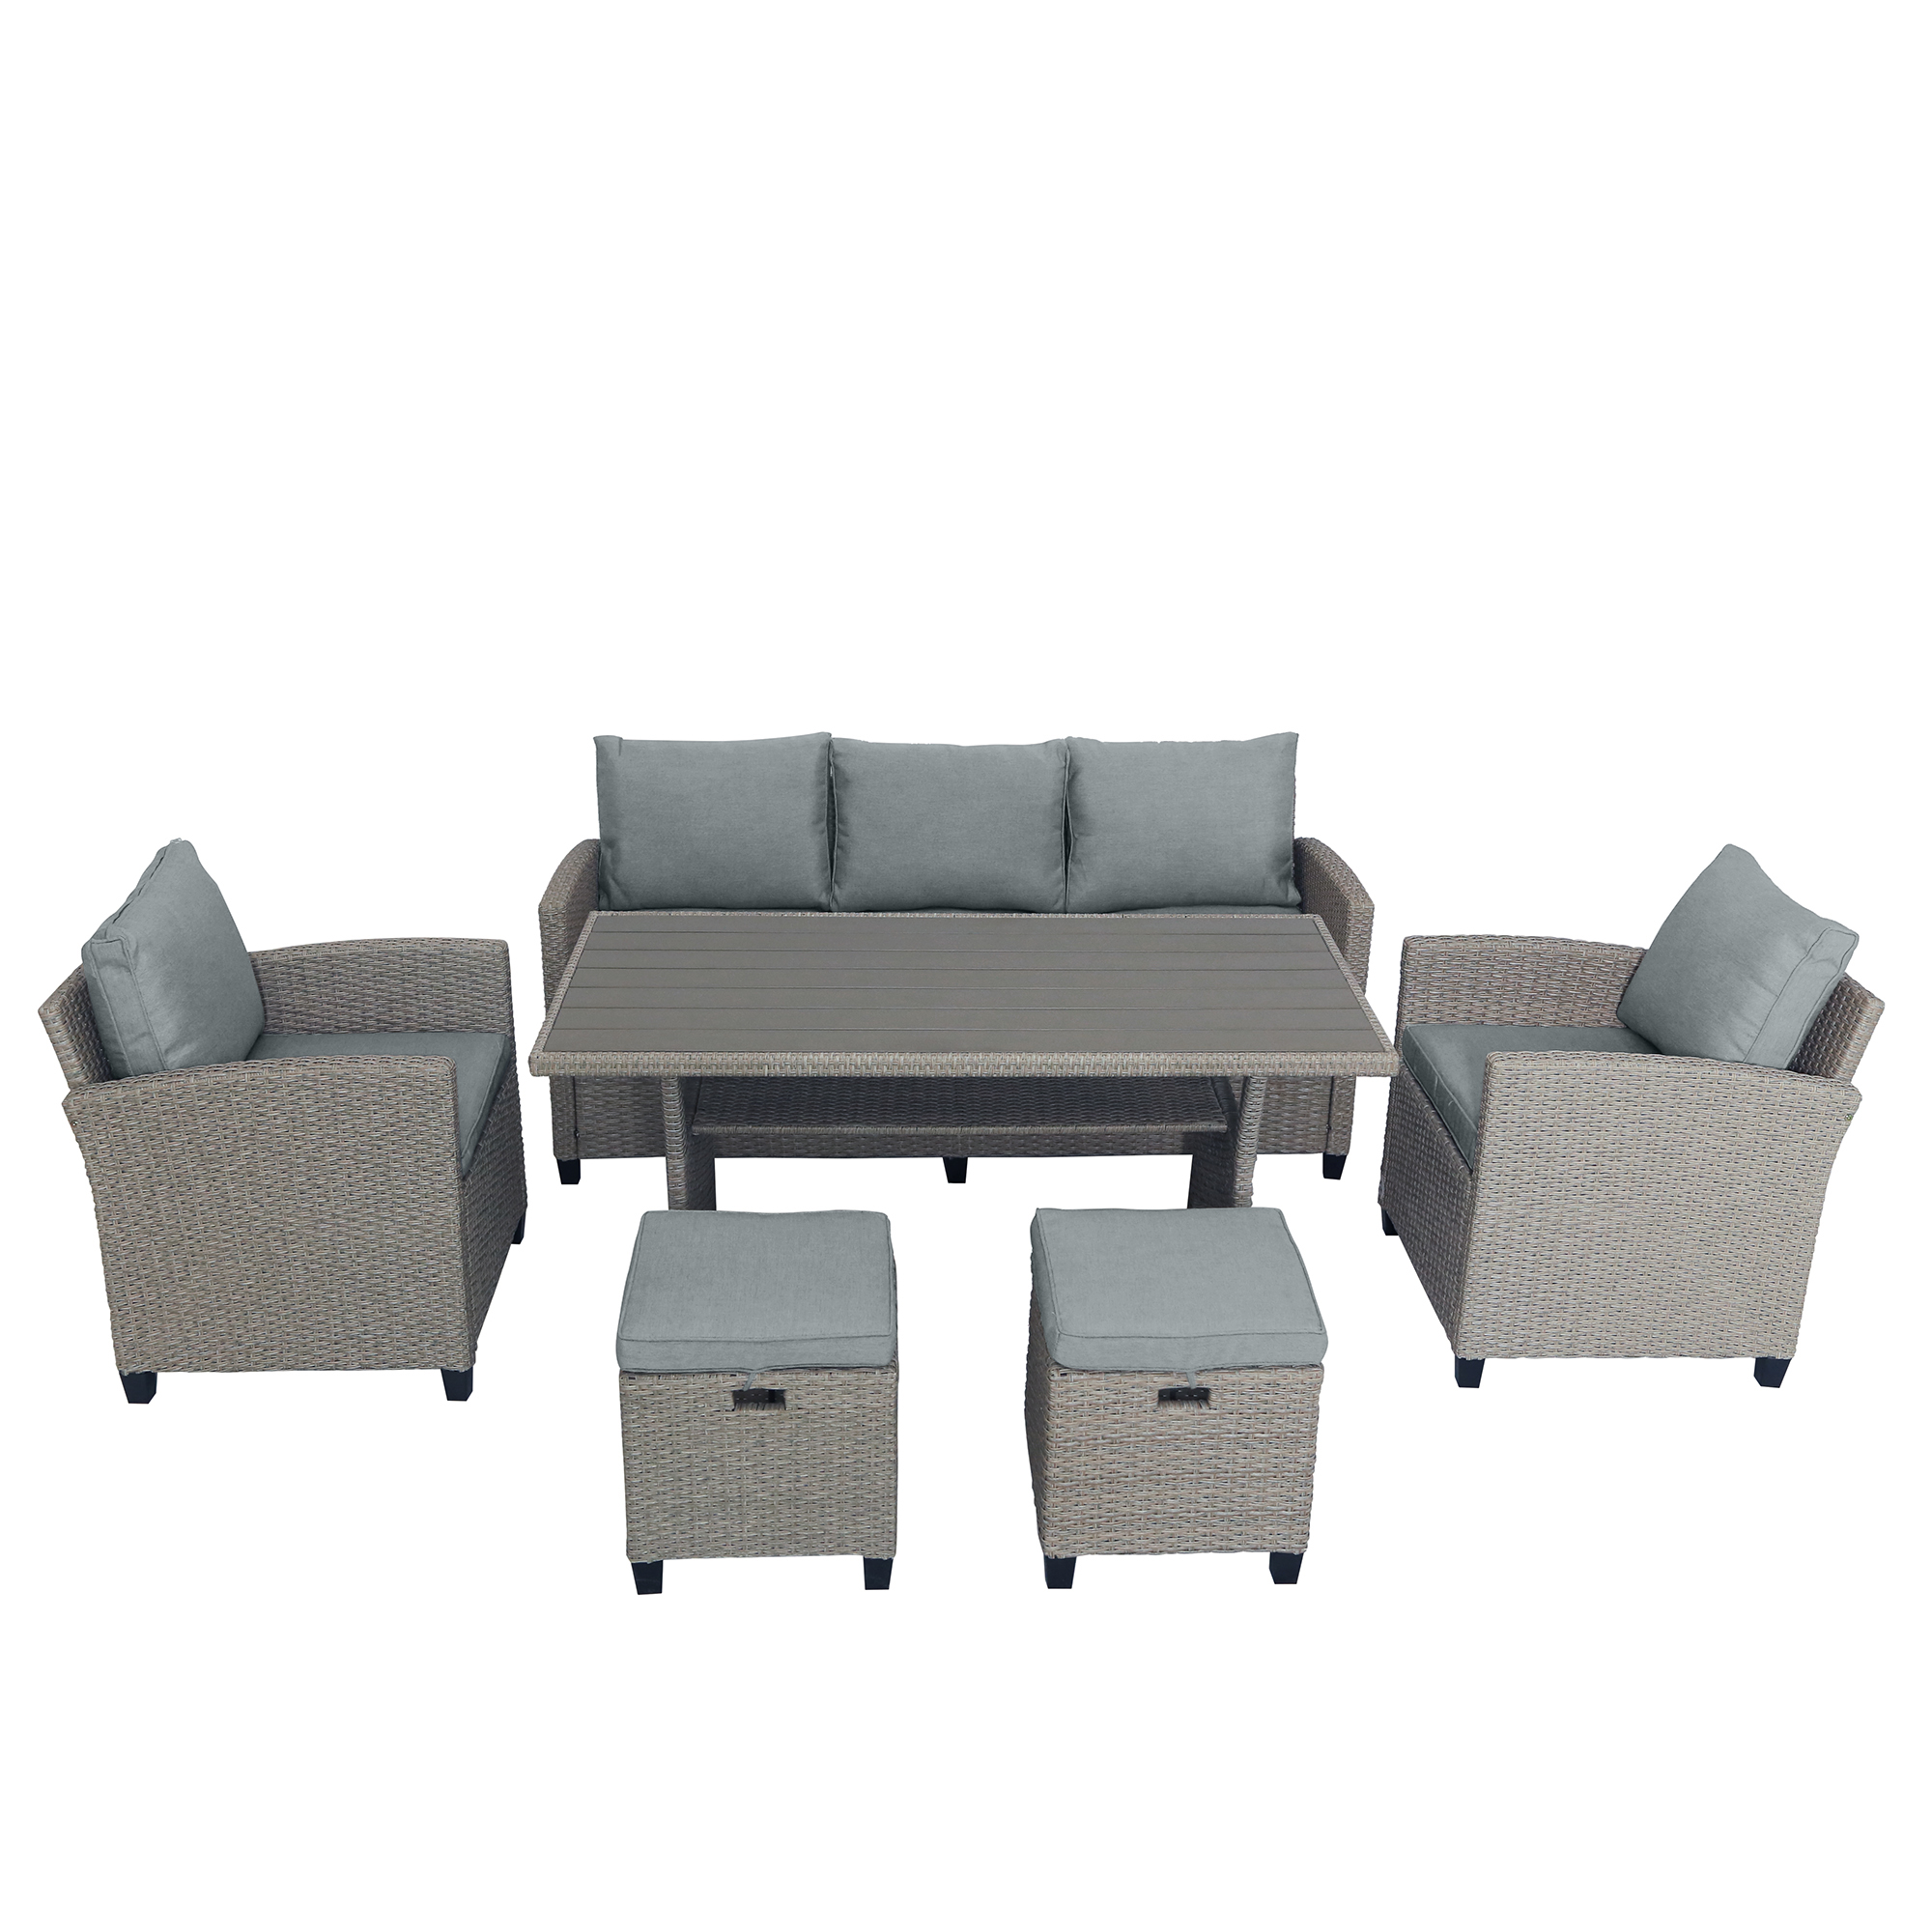 6 Pieces Outdoor Dining Sets, Sectional Sofa Patio Dining Table and Chairs Set, PE Rattan Conversation Set, Gray Wicker Garden Backyard Sectional Sofa - image 5 of 9